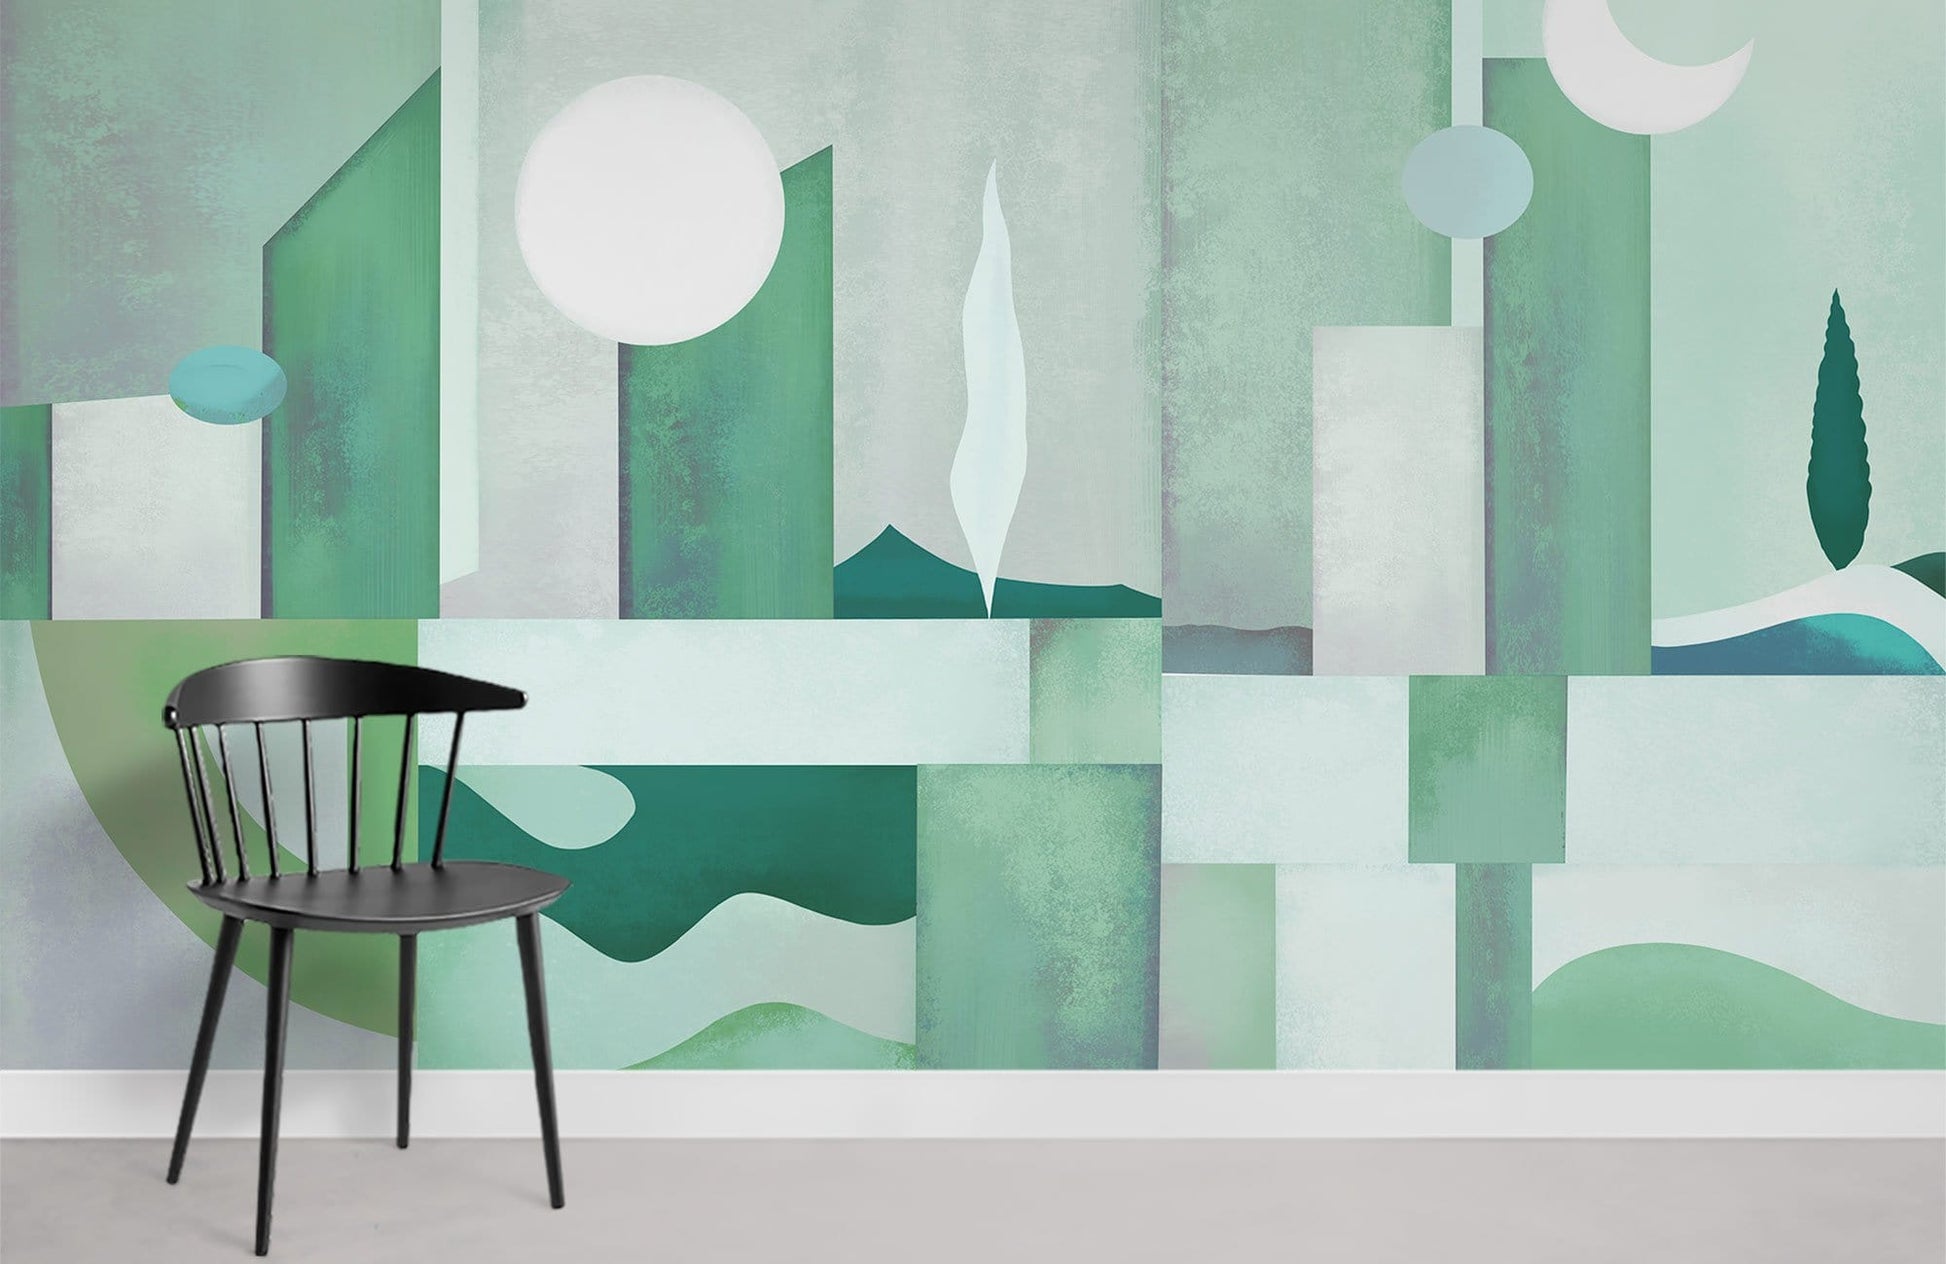 Wallpaper mural with a green geometric pattern for use as home decor